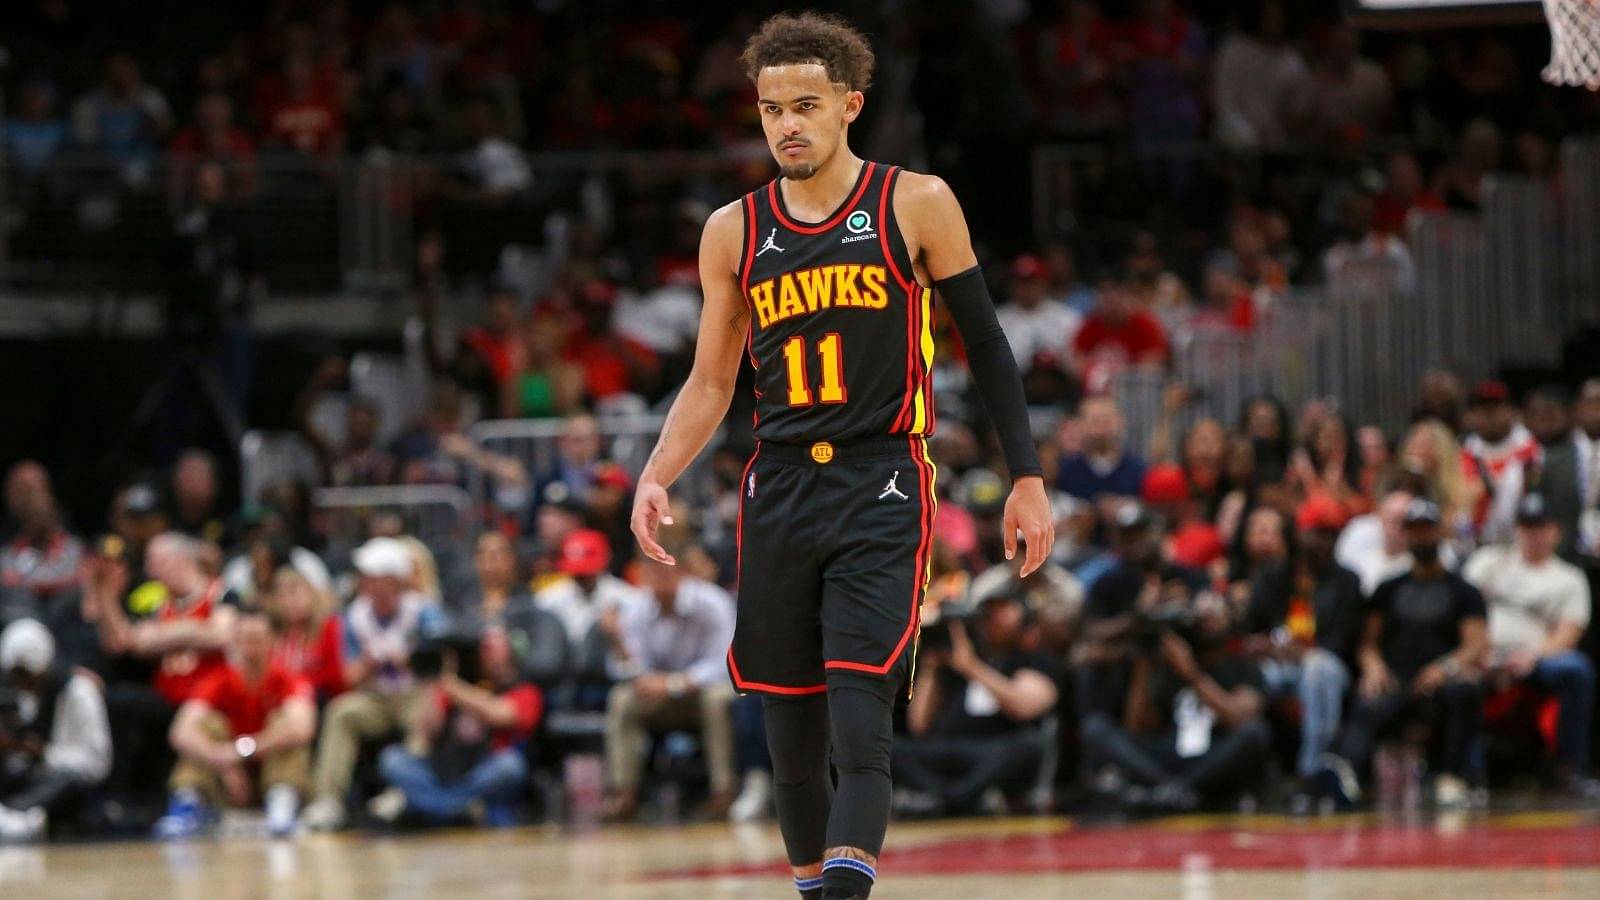 "Ice Trae is laughably overrated, he melted every game in this series": Skip Bayless rips into Atlanta Hawks point guard Trae Young